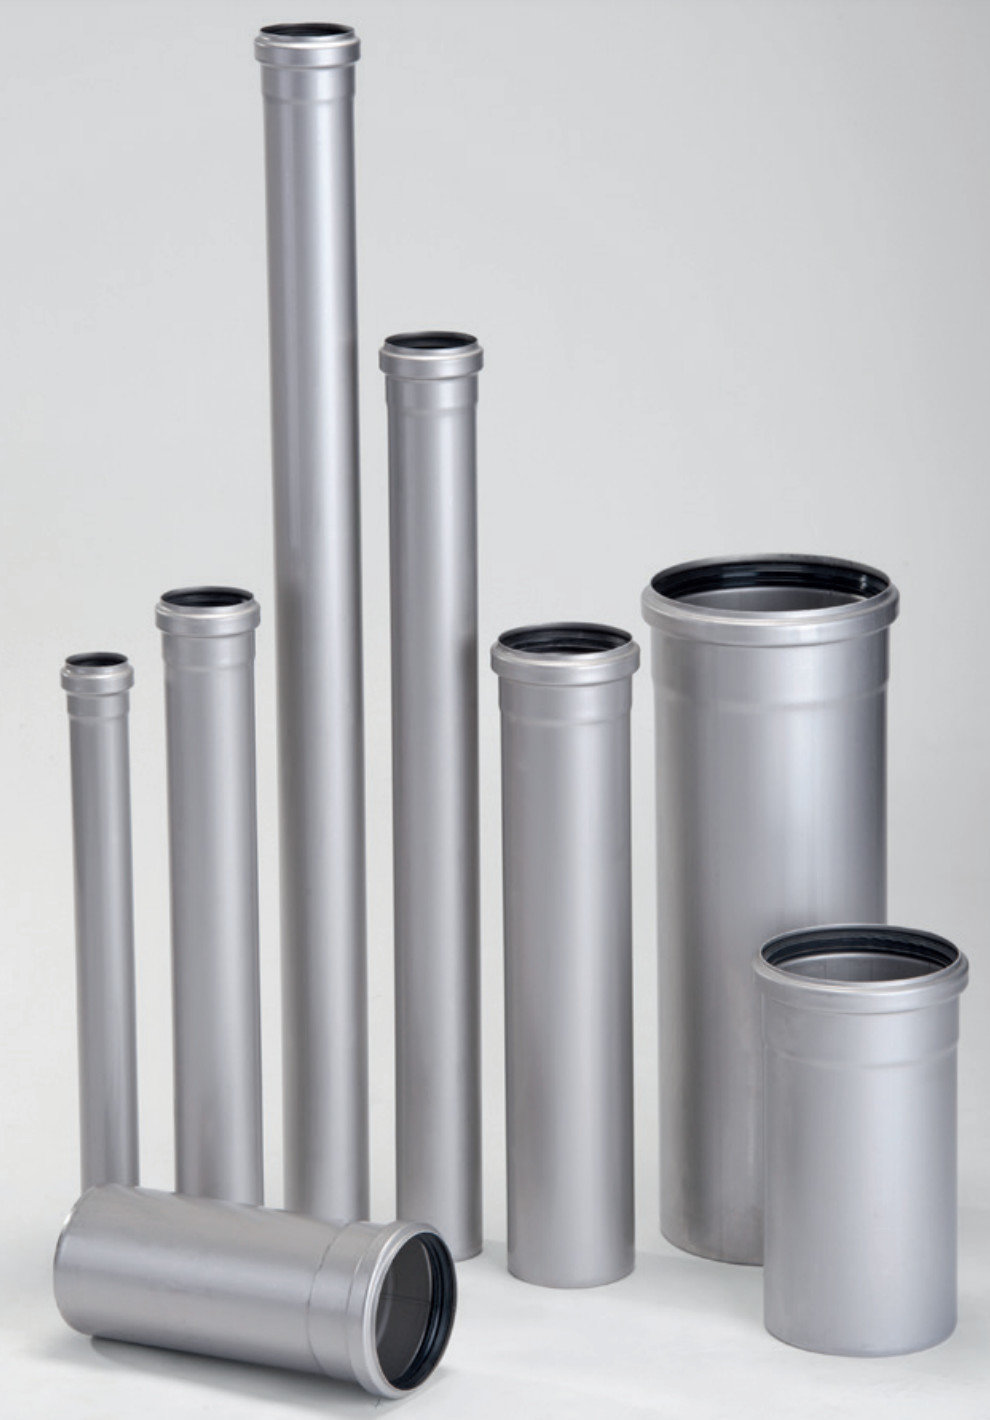 ACO push fit pipes